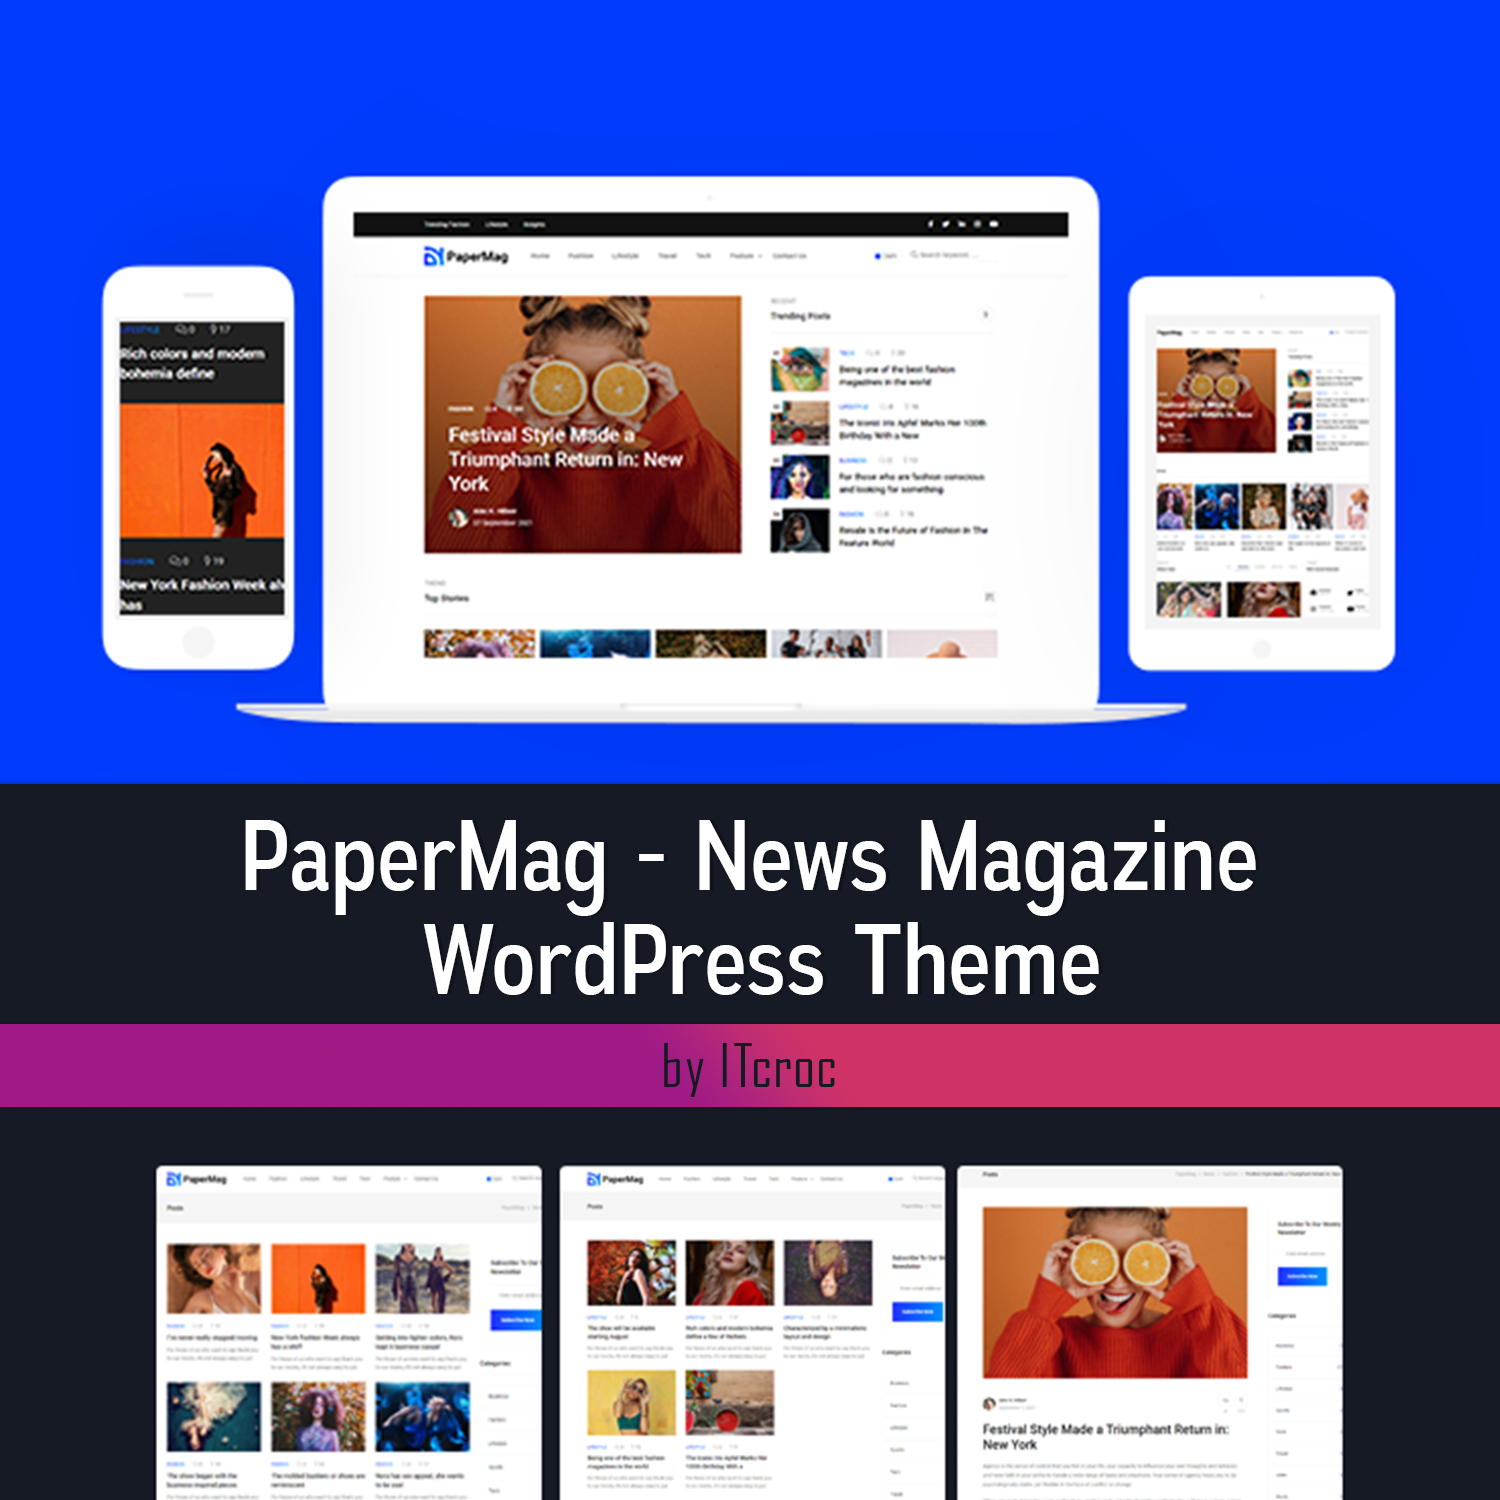 Images with papermag news magazine wordpress theme.